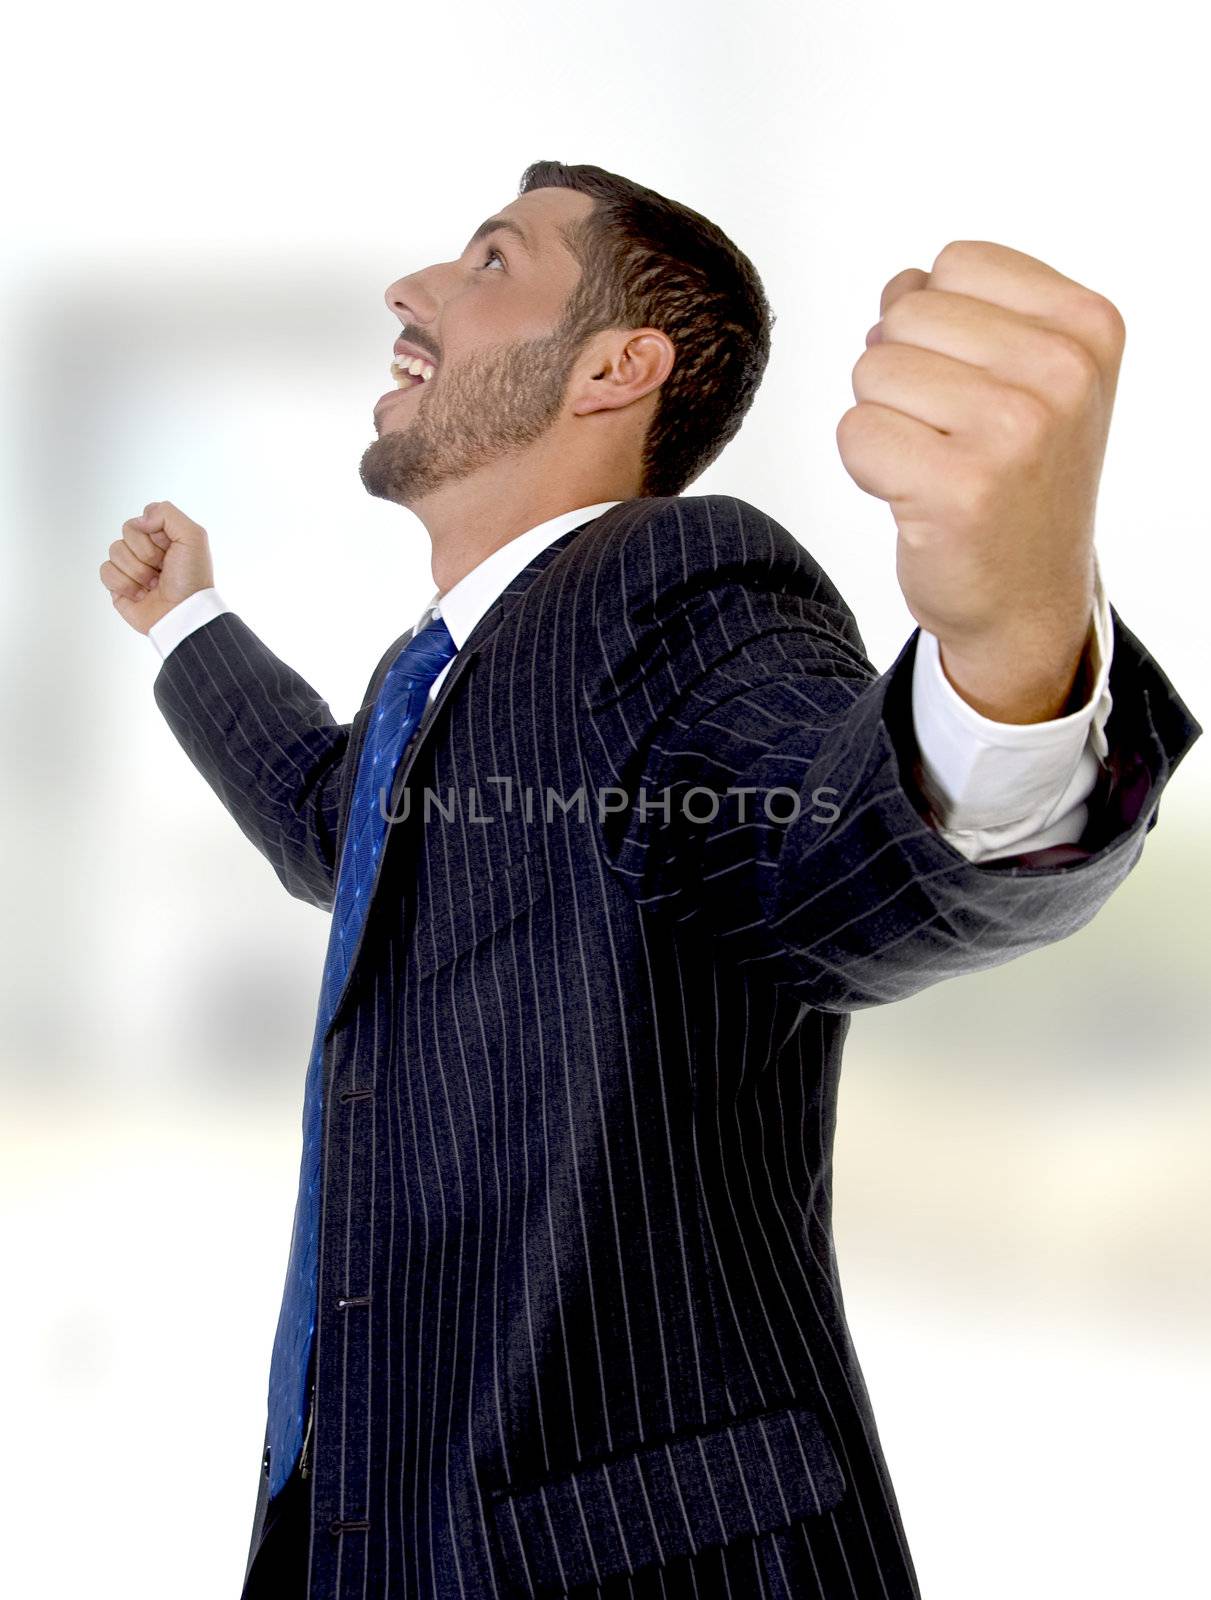 potrait of happy businessman
on an abstract  background